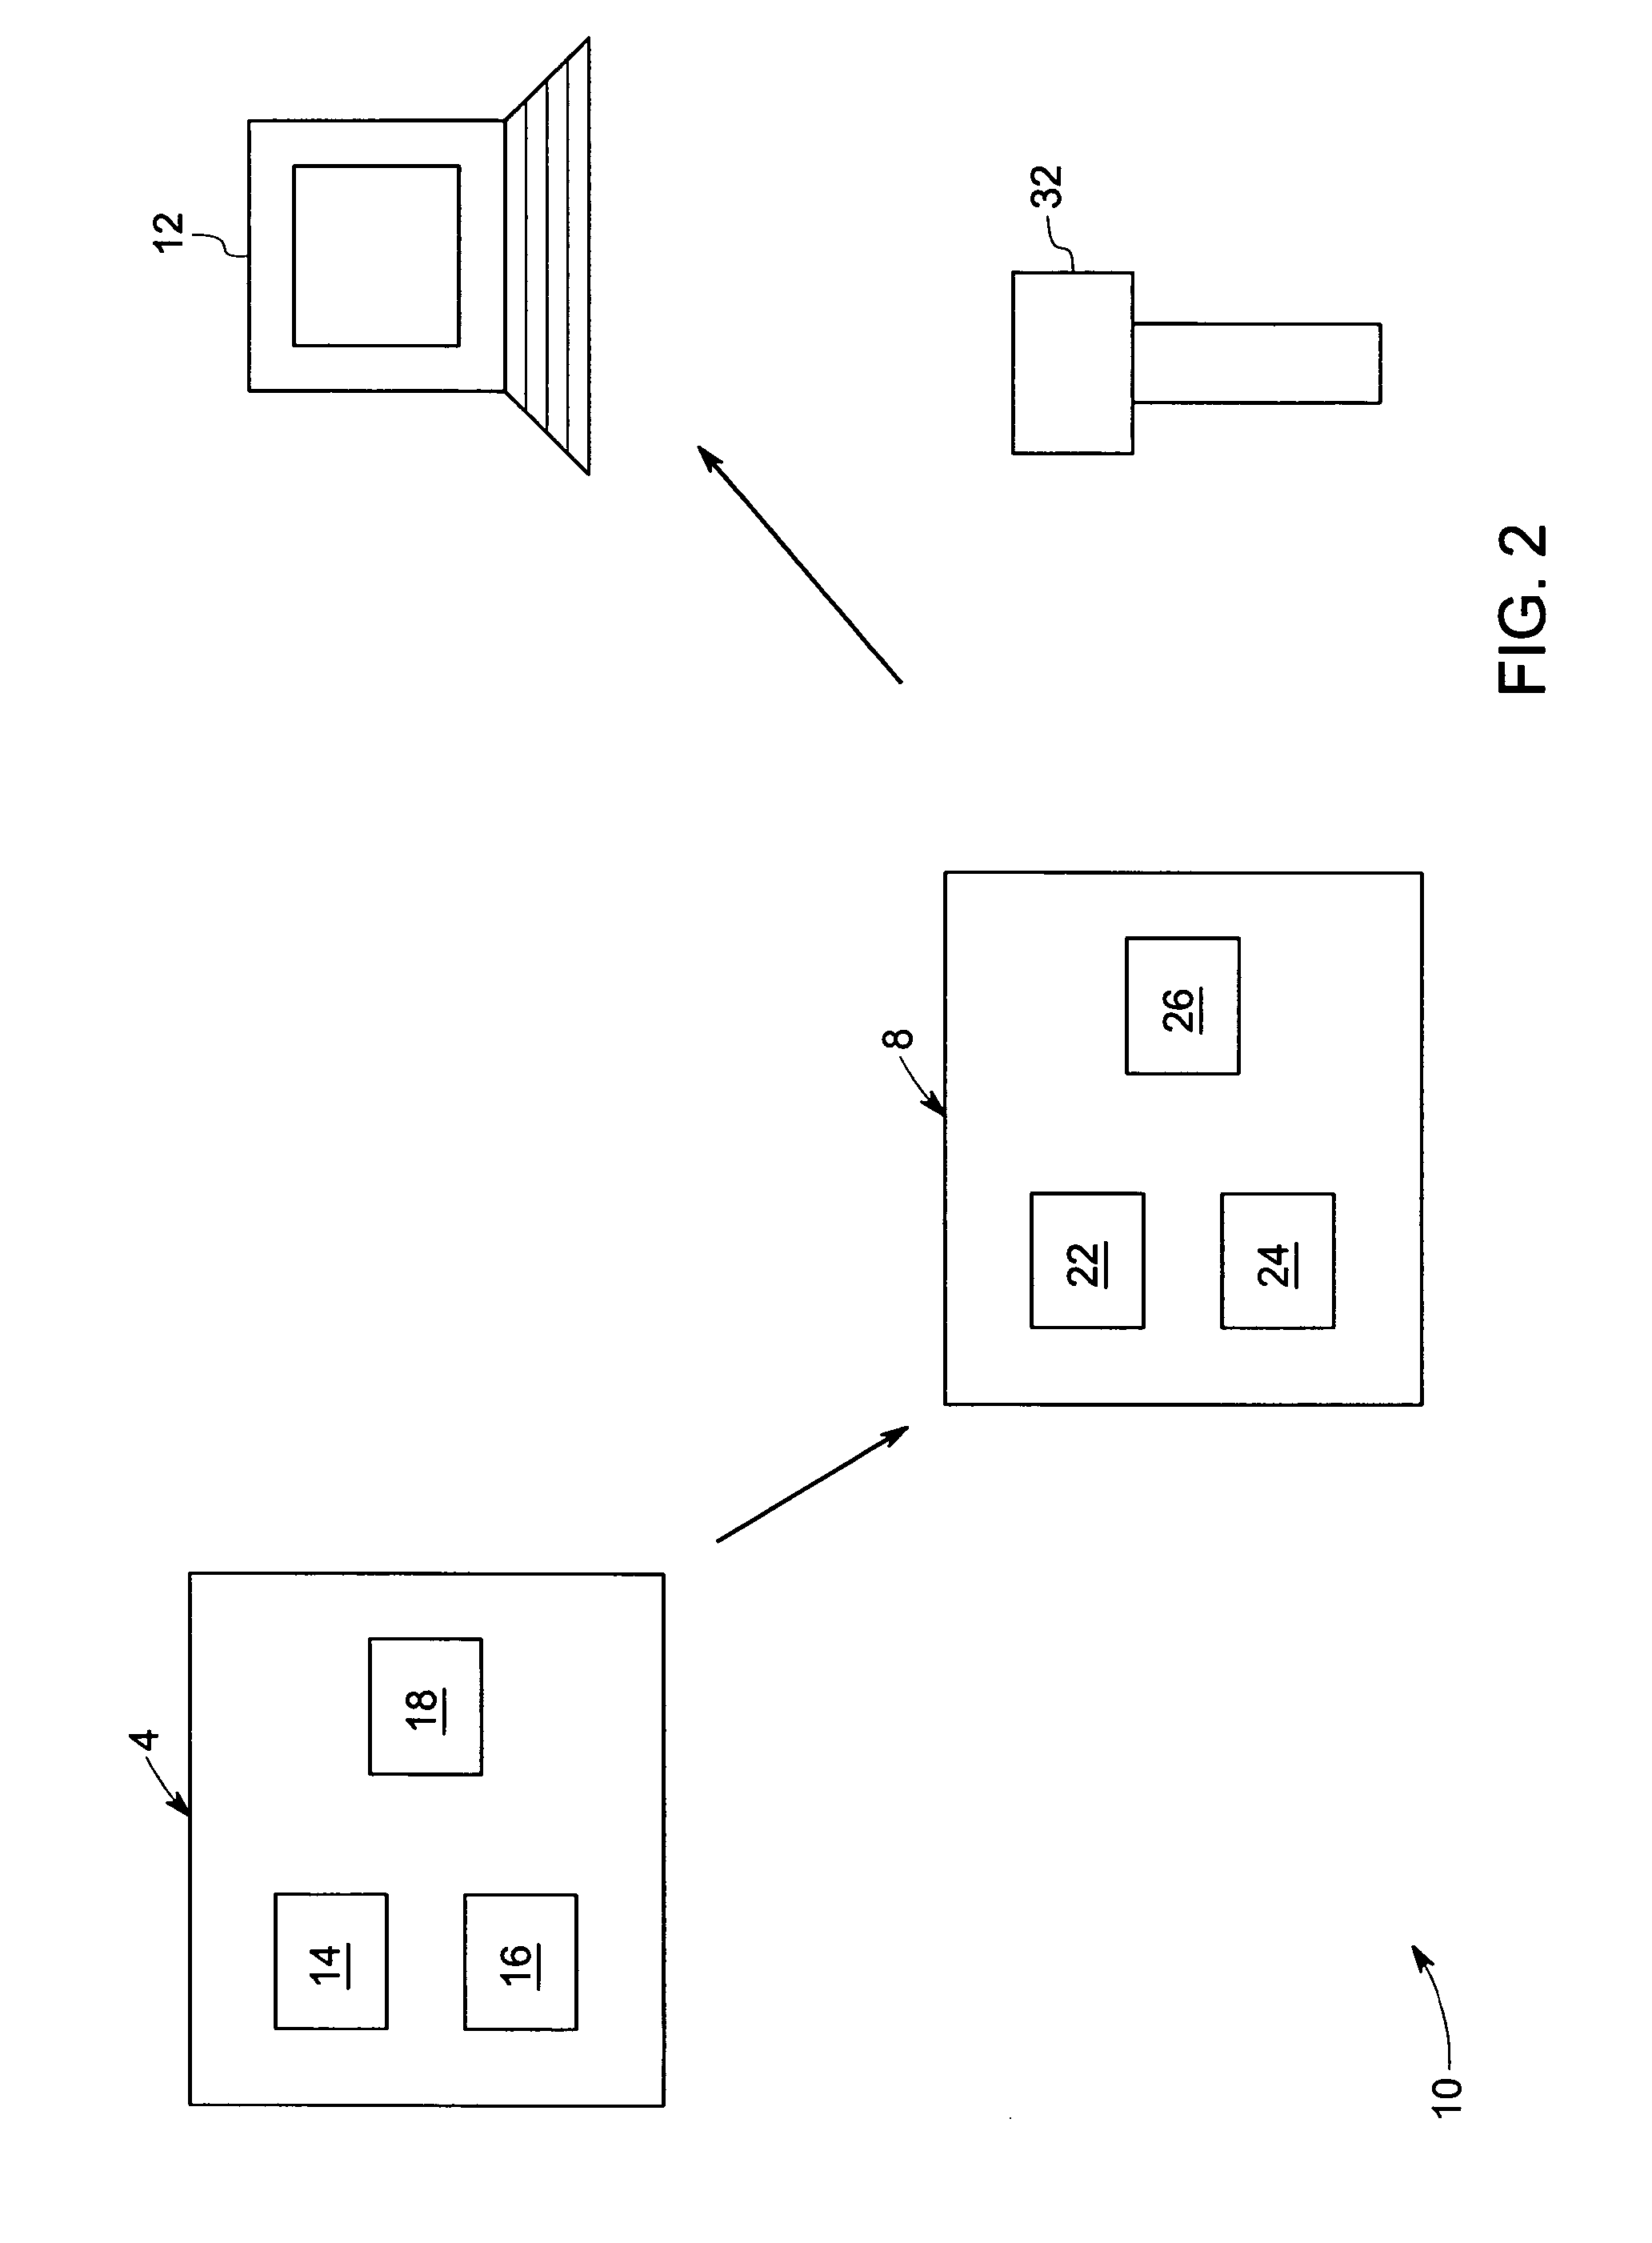 Method and system for discrete location triggering for enhanced asset management and tracking